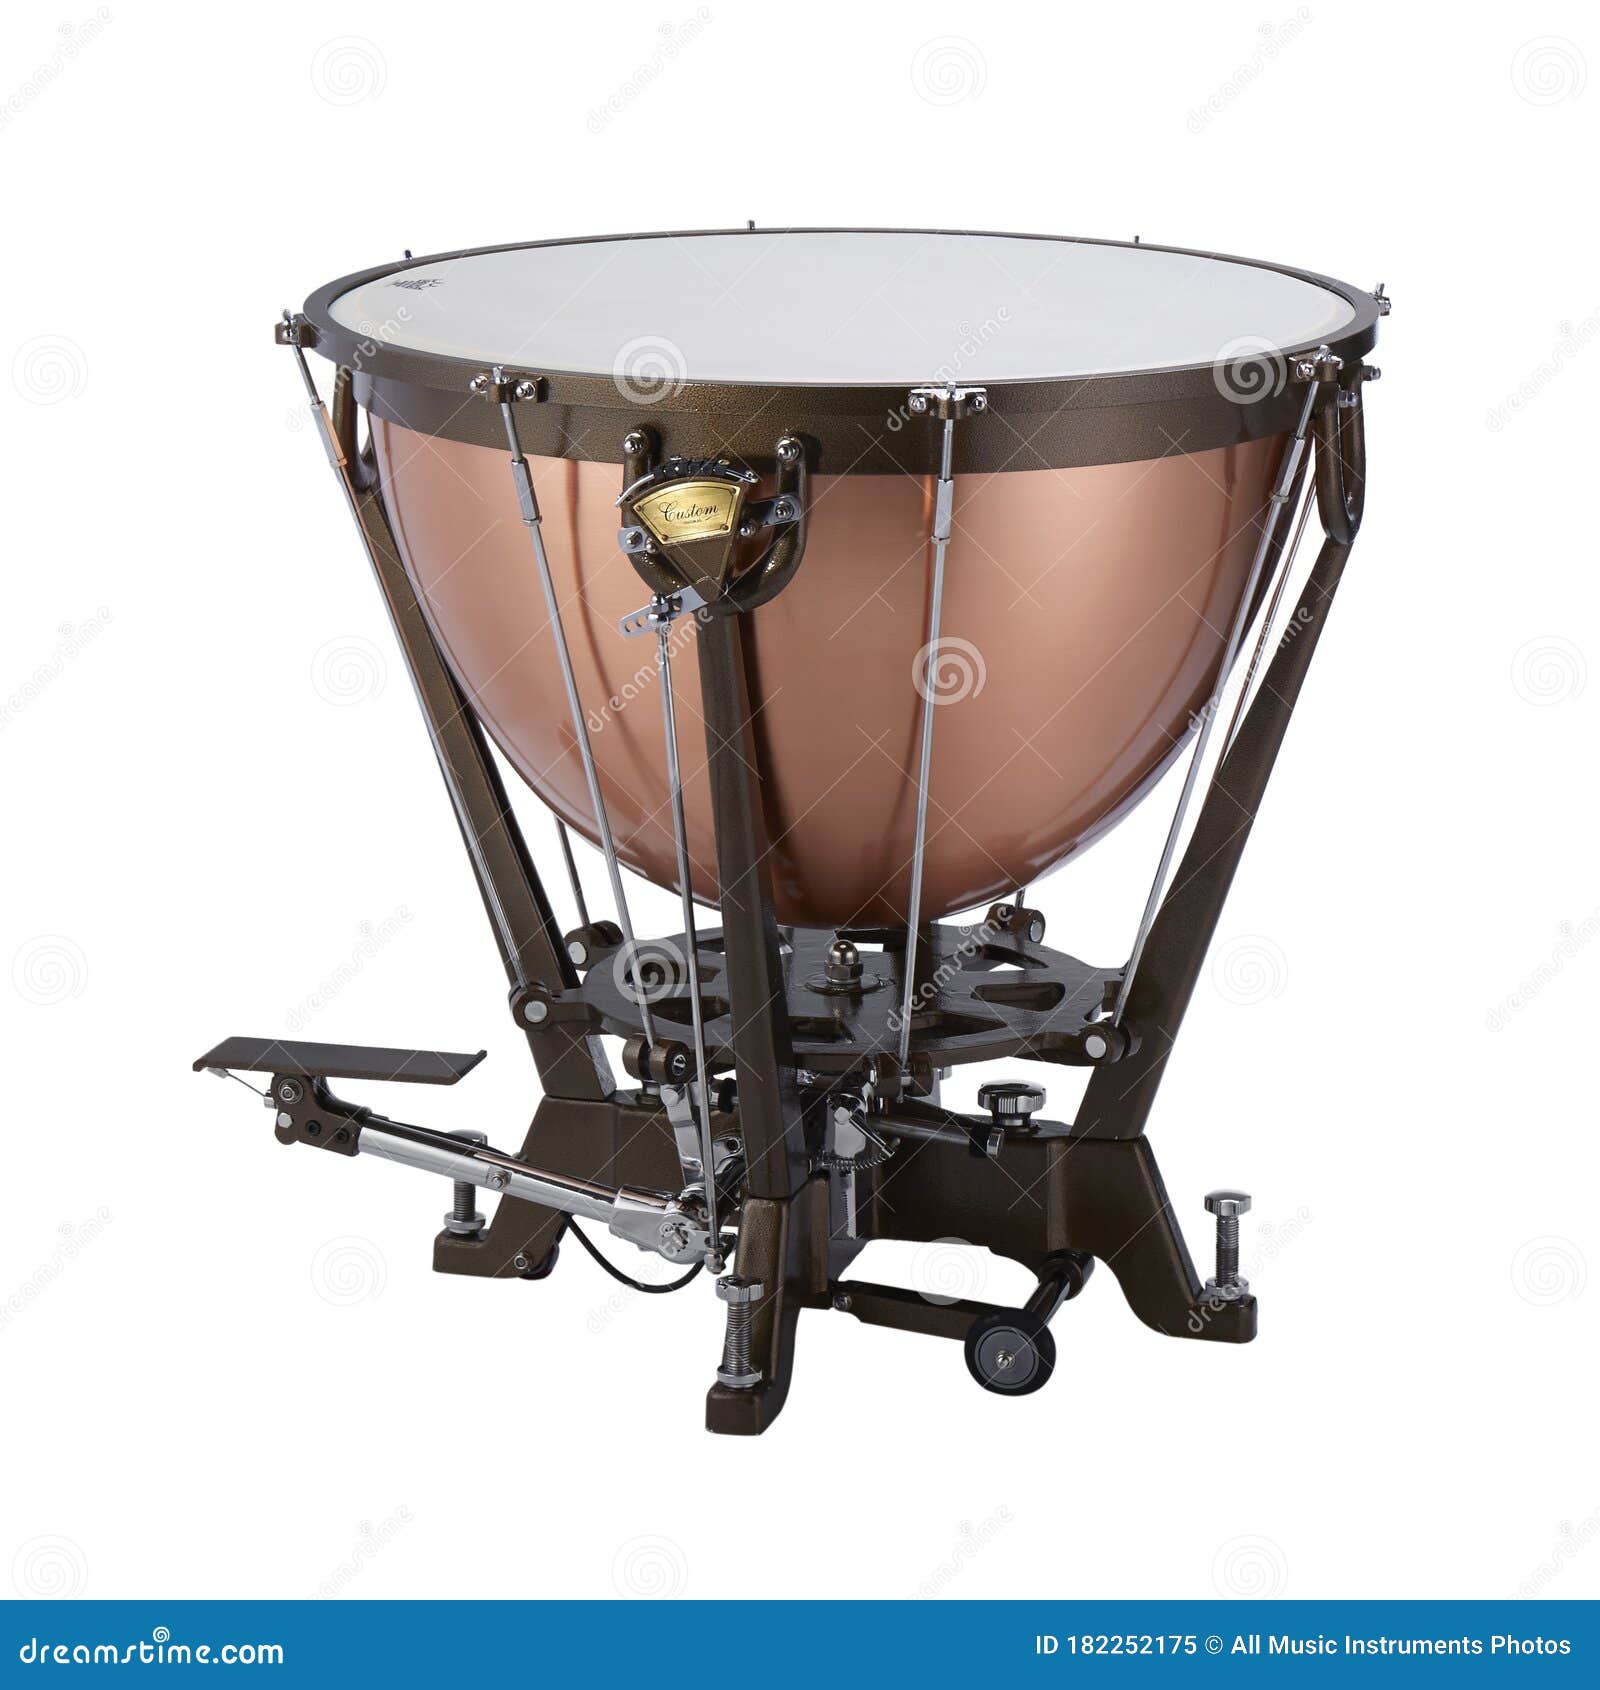 timpani, kettledrums, timps, percussion music instrument  on white background